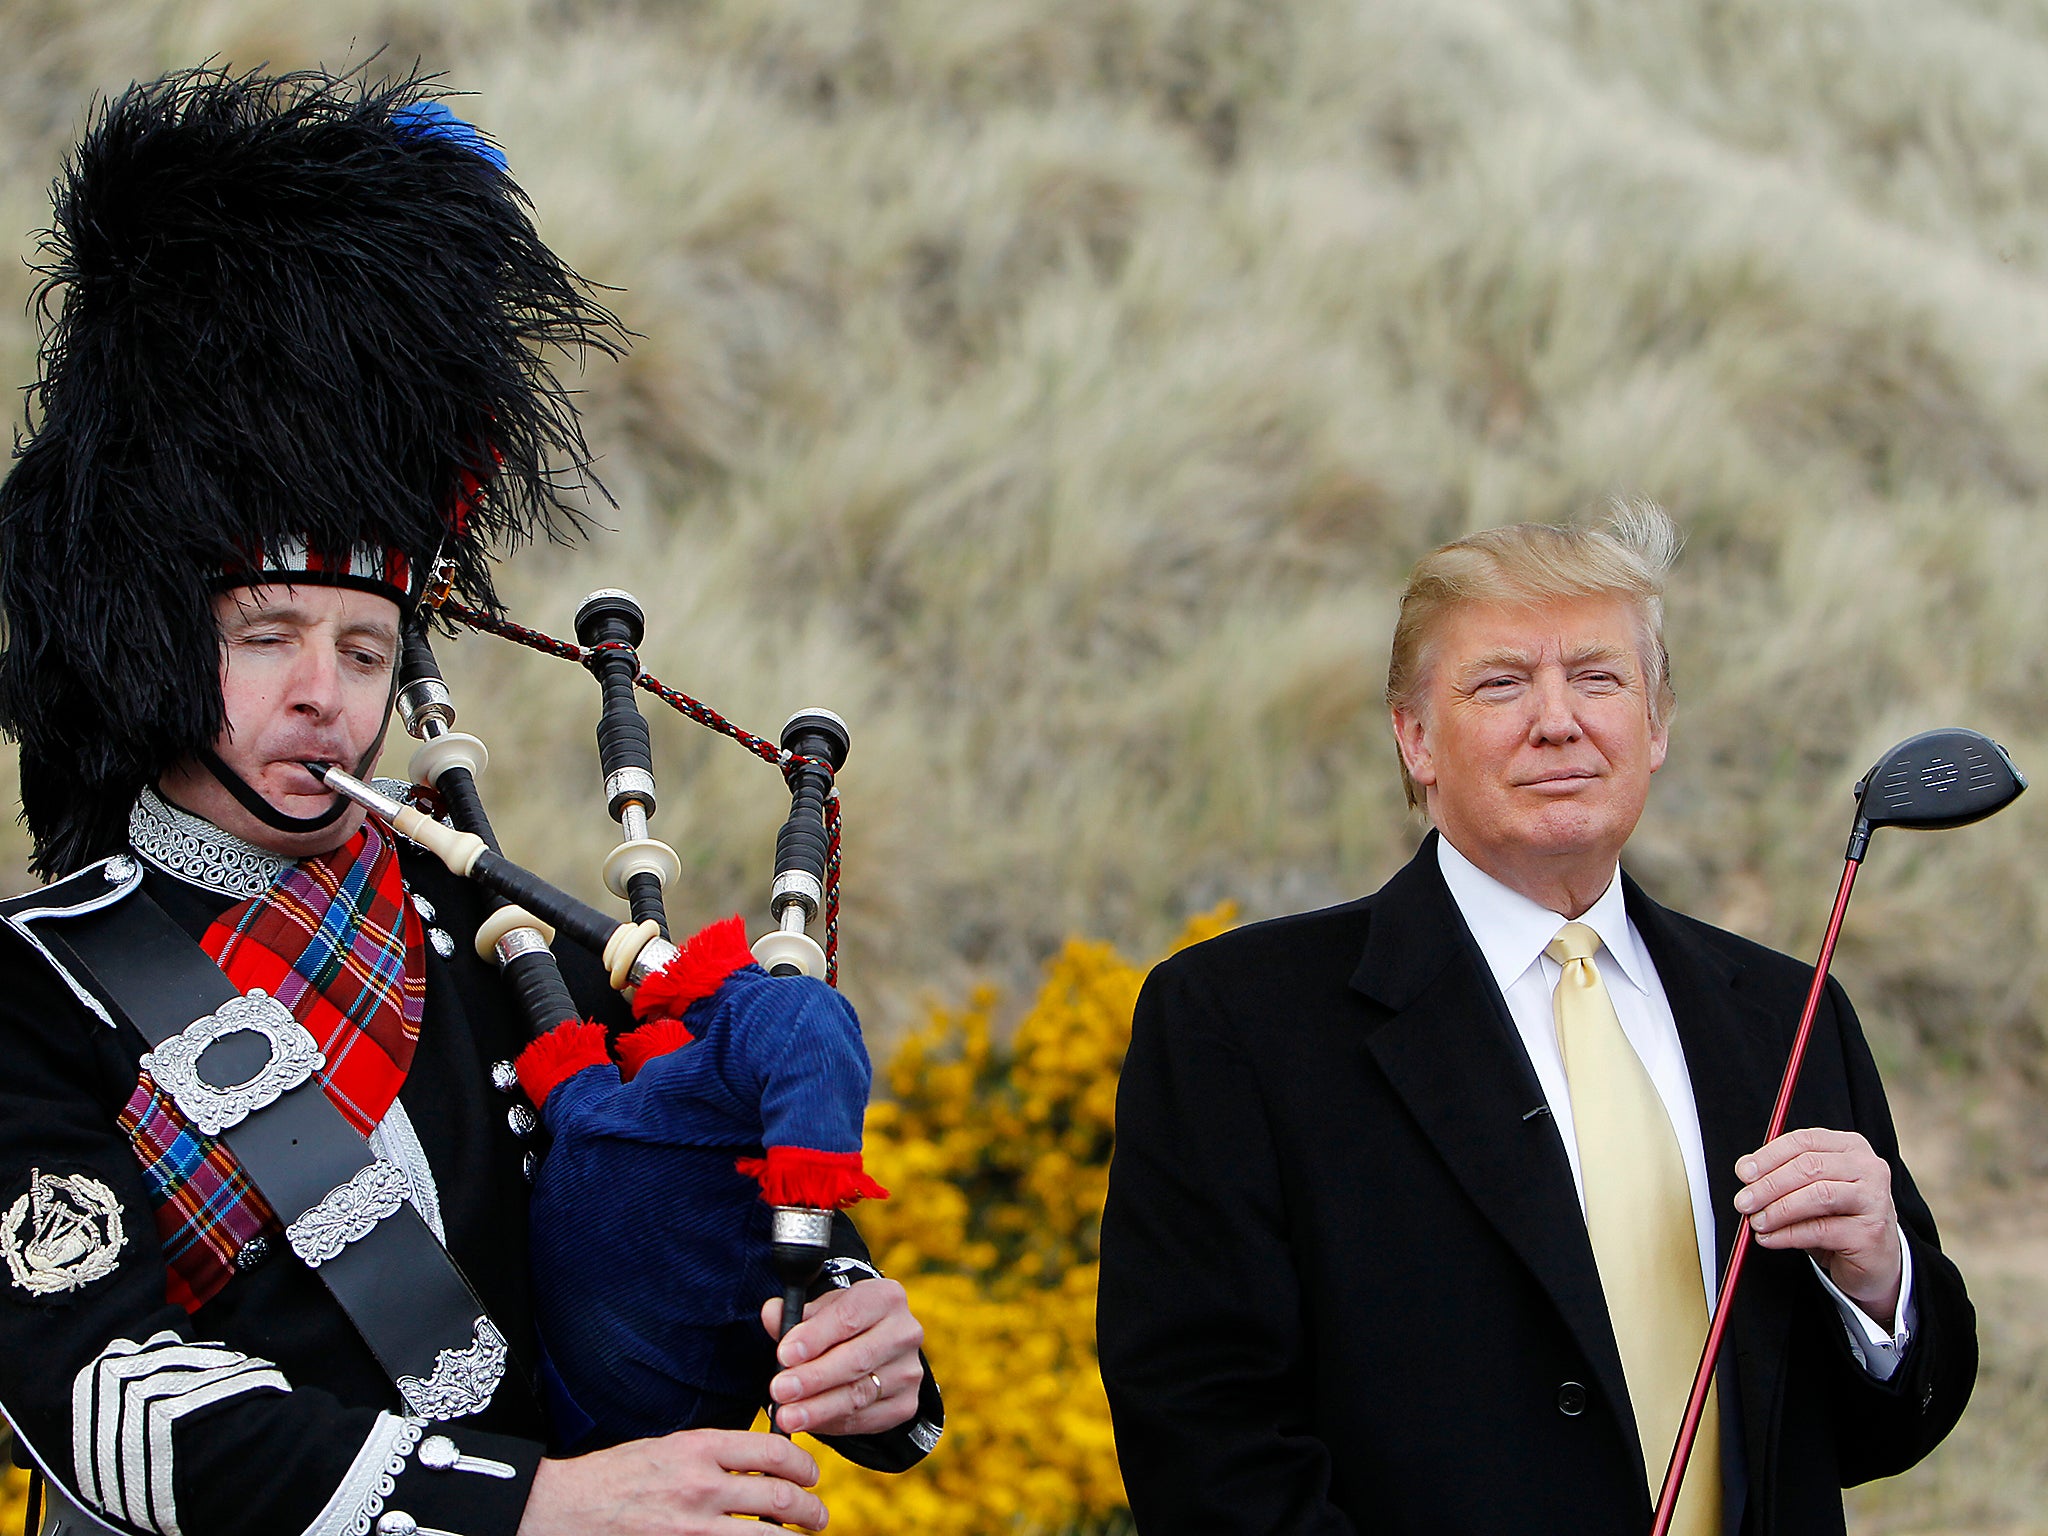 Donald Trump at a press event at the golf course site in 2010